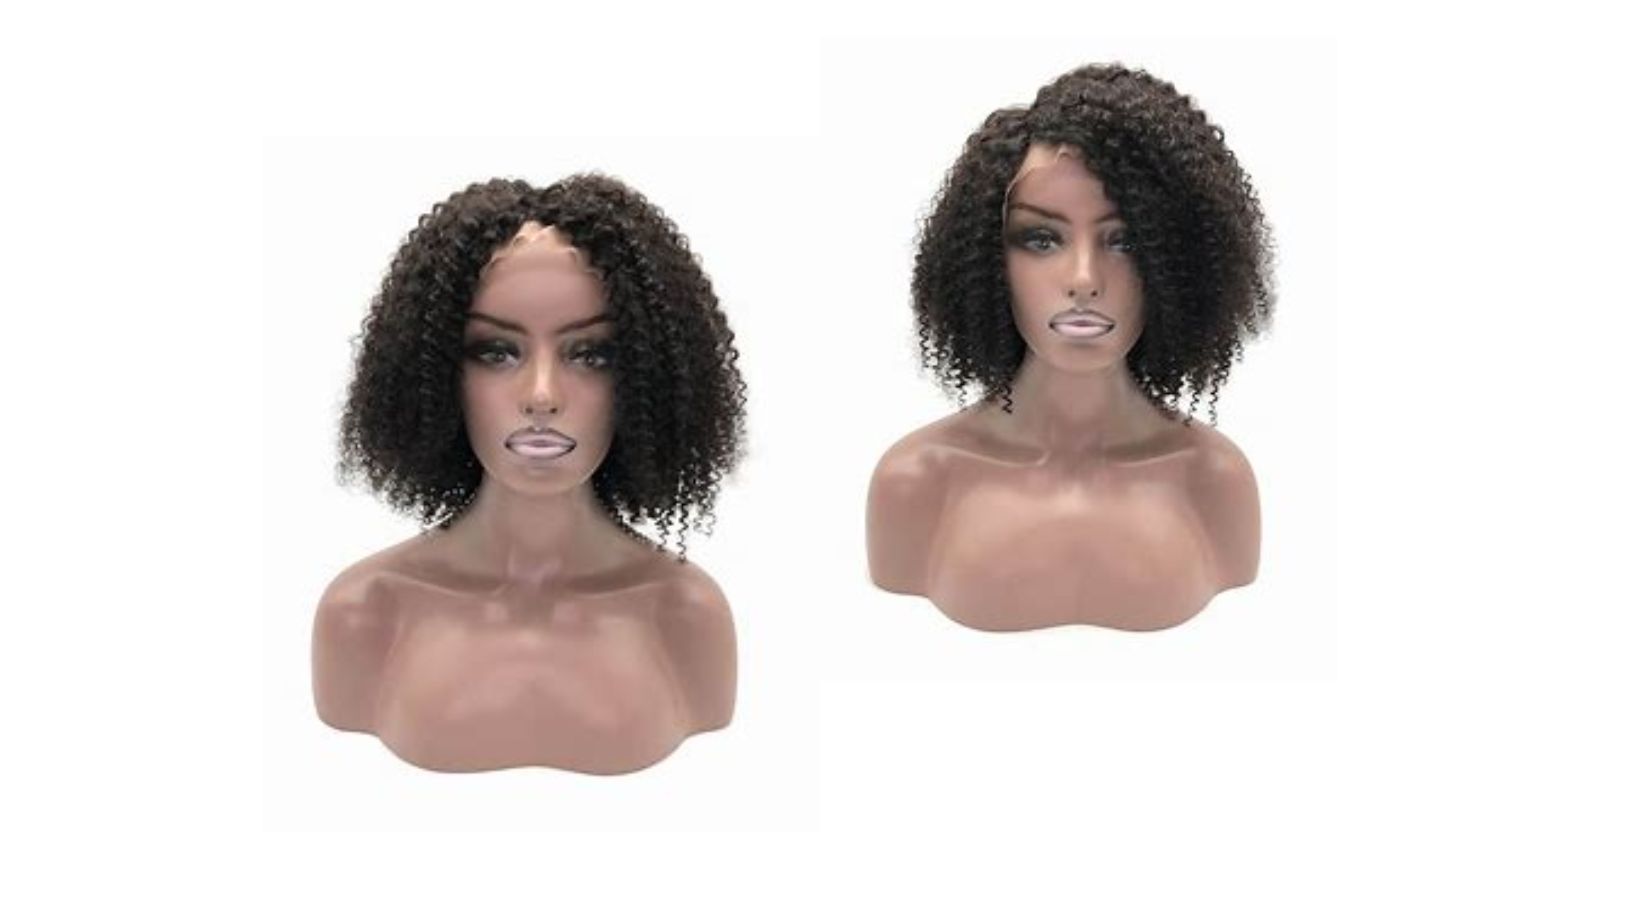 How to Keep Your HD Lace Frontal Wig Looking Fresh and New